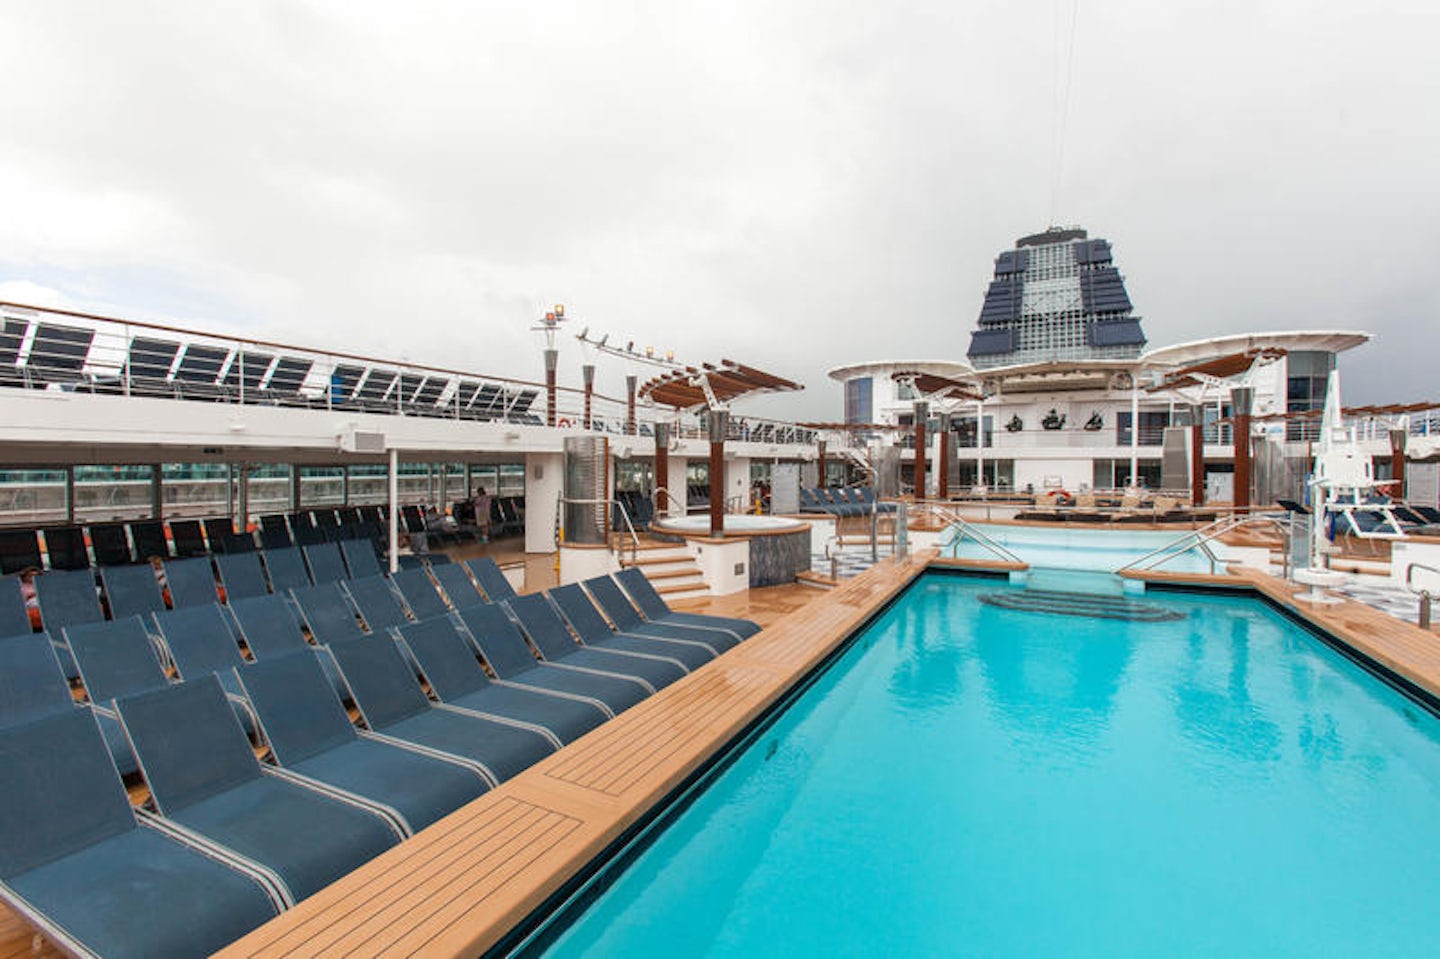 The Main Pool and Hot Tubs on Celebrity Constellation